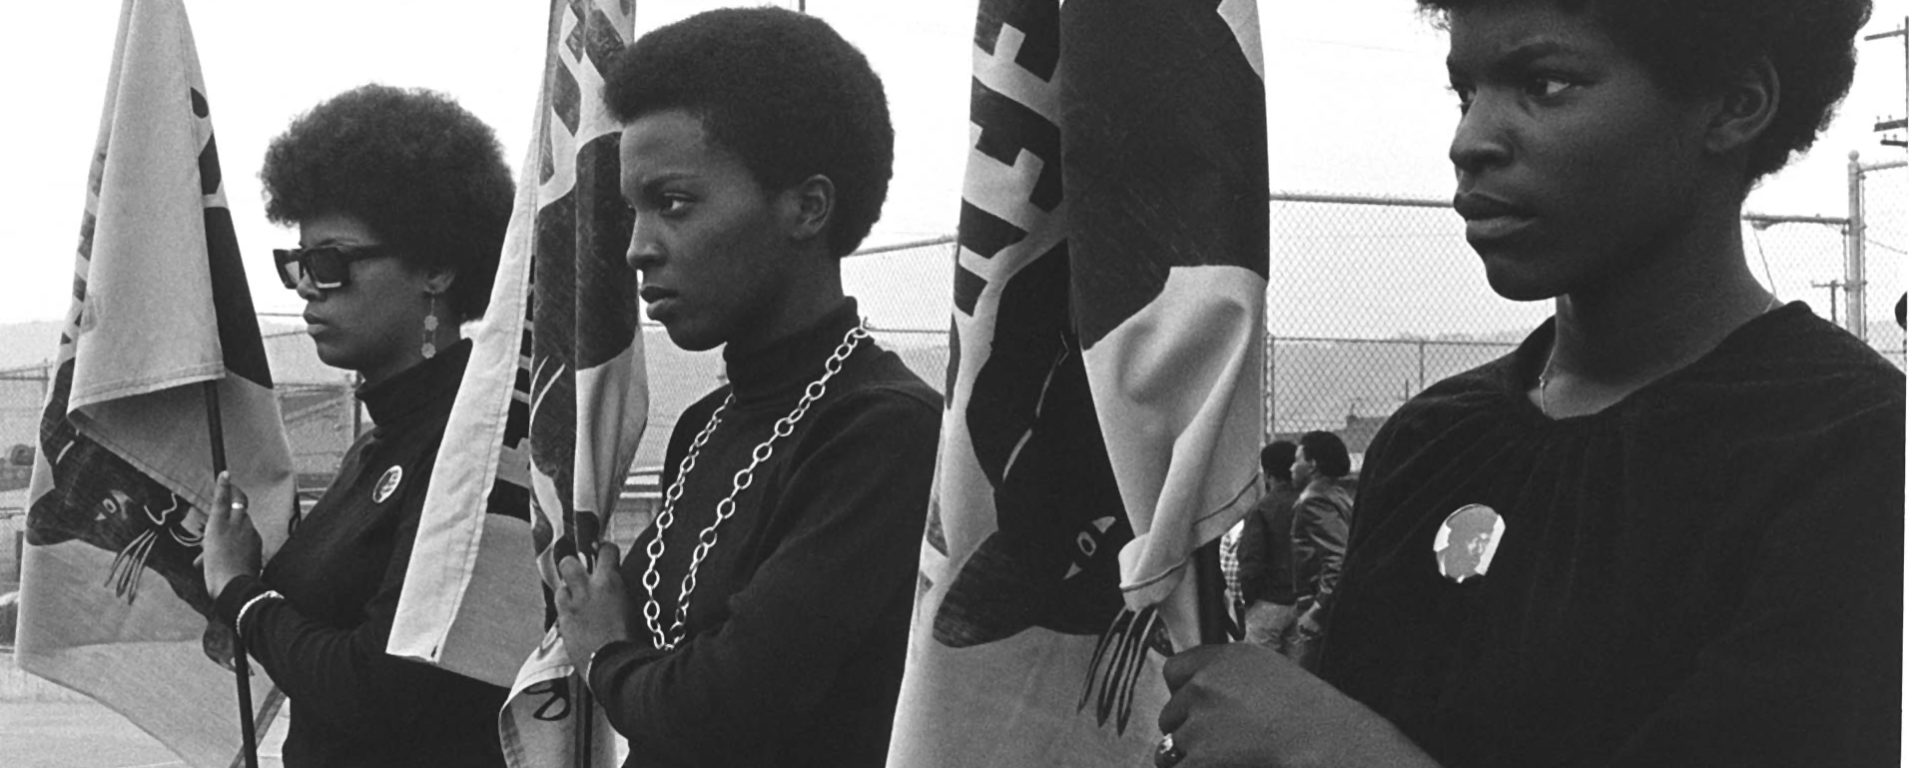 Women in the Black Panther Party